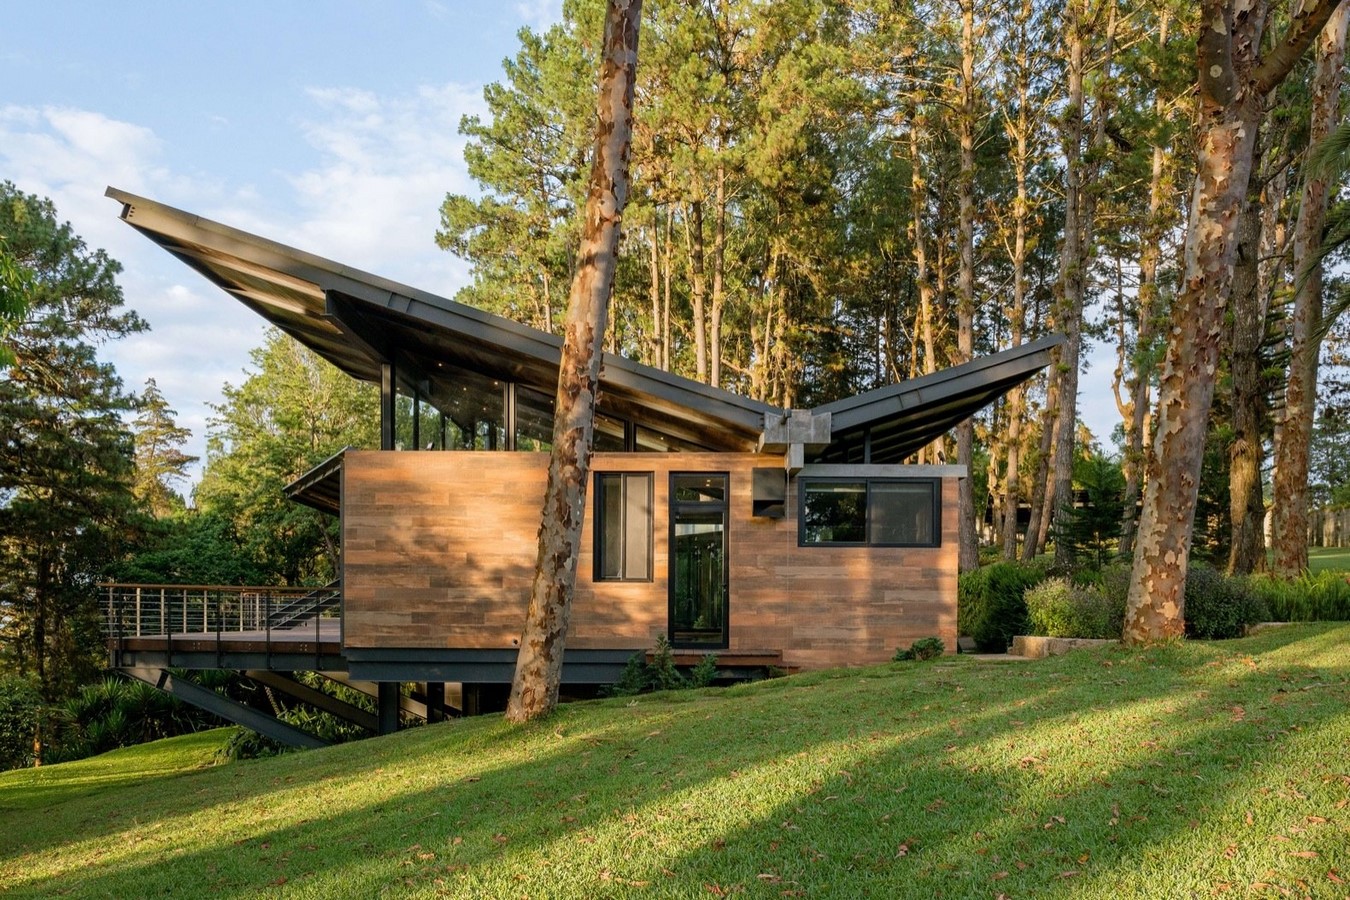 10 Examples of butterfly roofing in the Mid-Century Classic Architecture - Sheet10